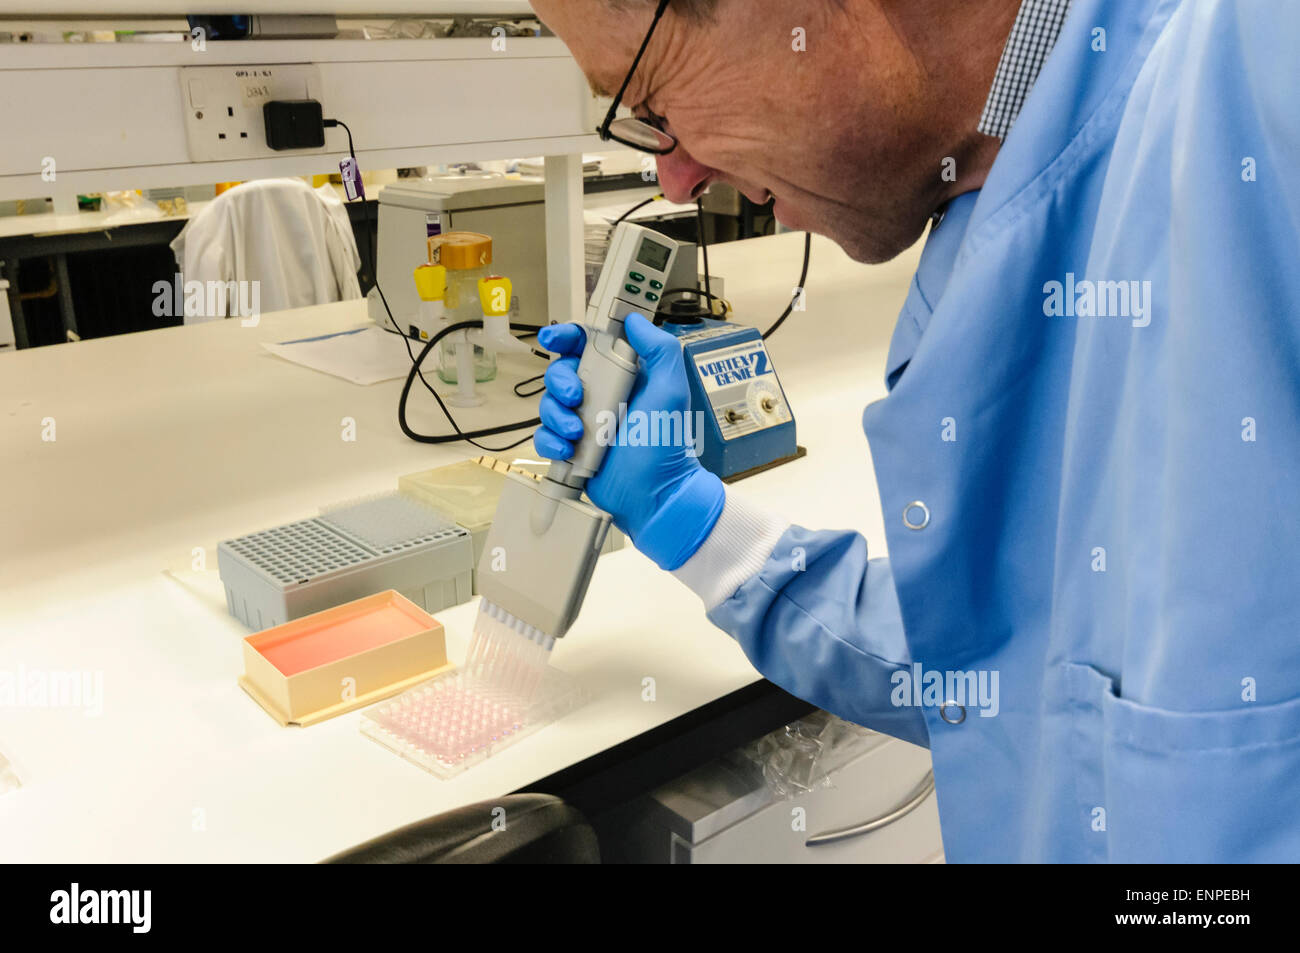 Man uses a multichannel pipette to dispense samples into a sample tray Stock Photo